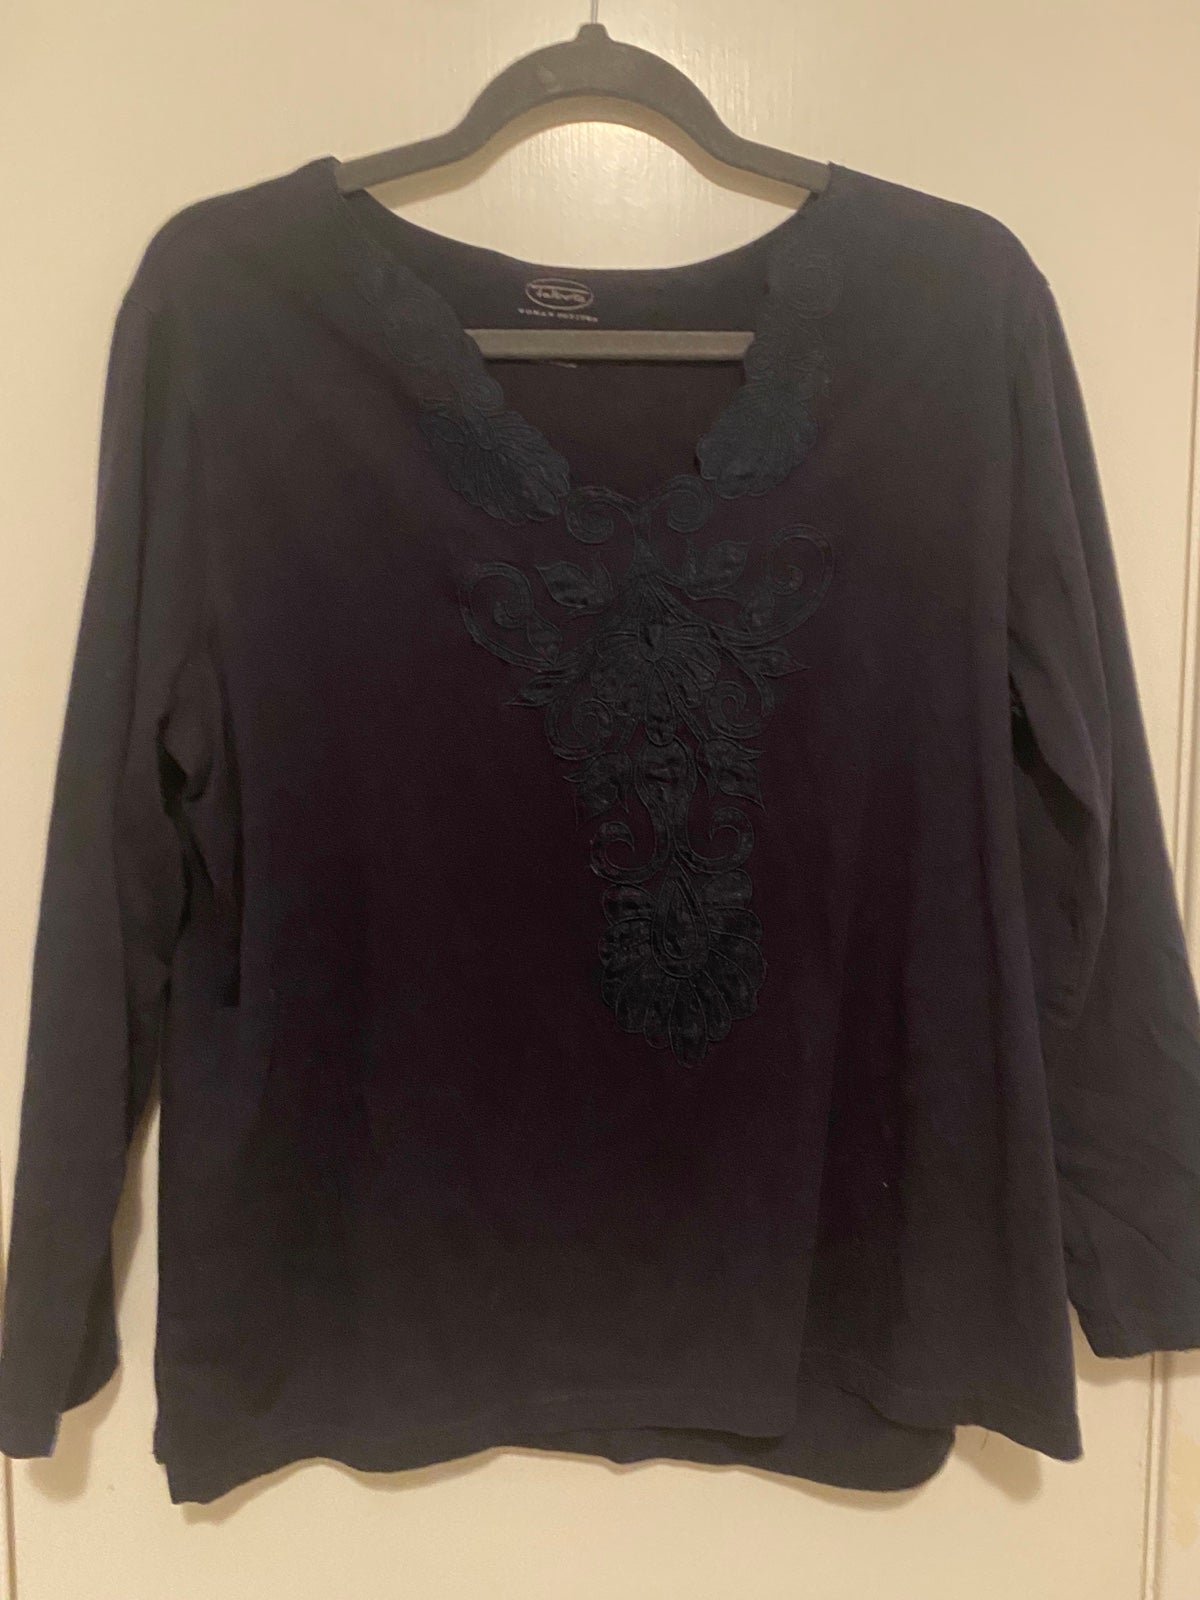 Talbots Long Sleeve Navy Blie Blousr with Embroidered N